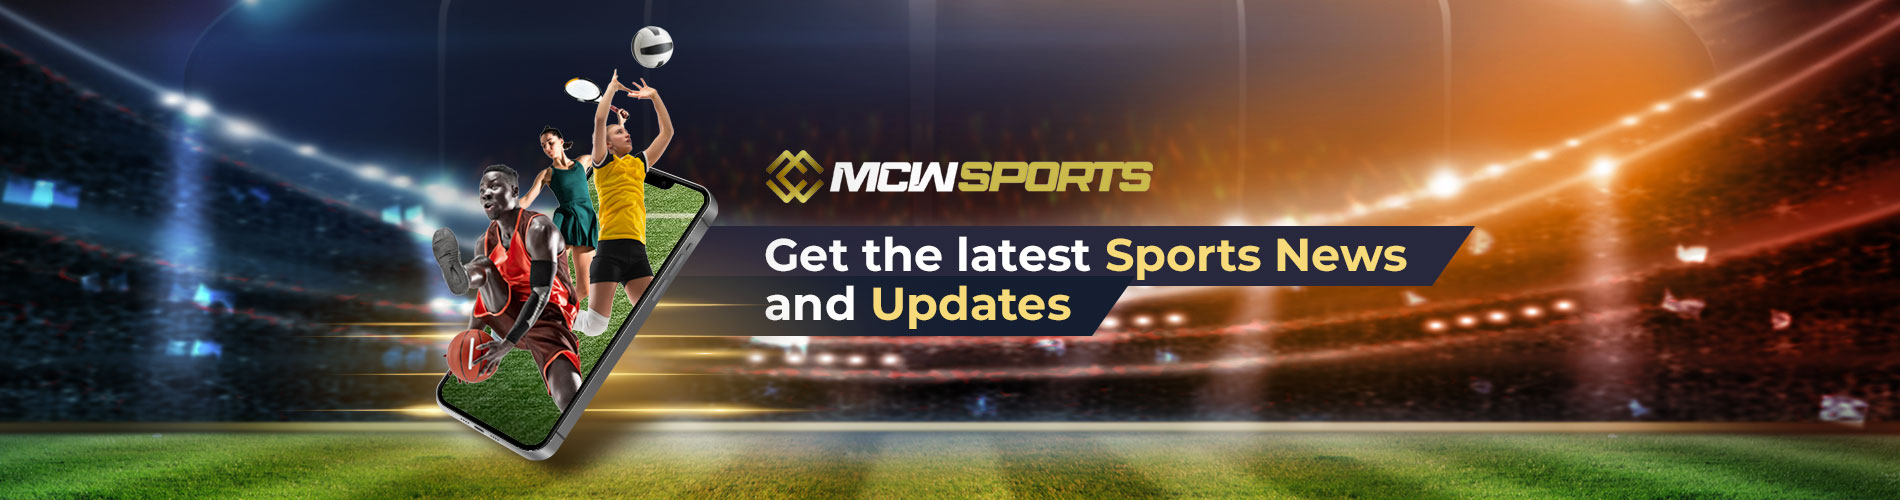 MCW Sports is an online sports website